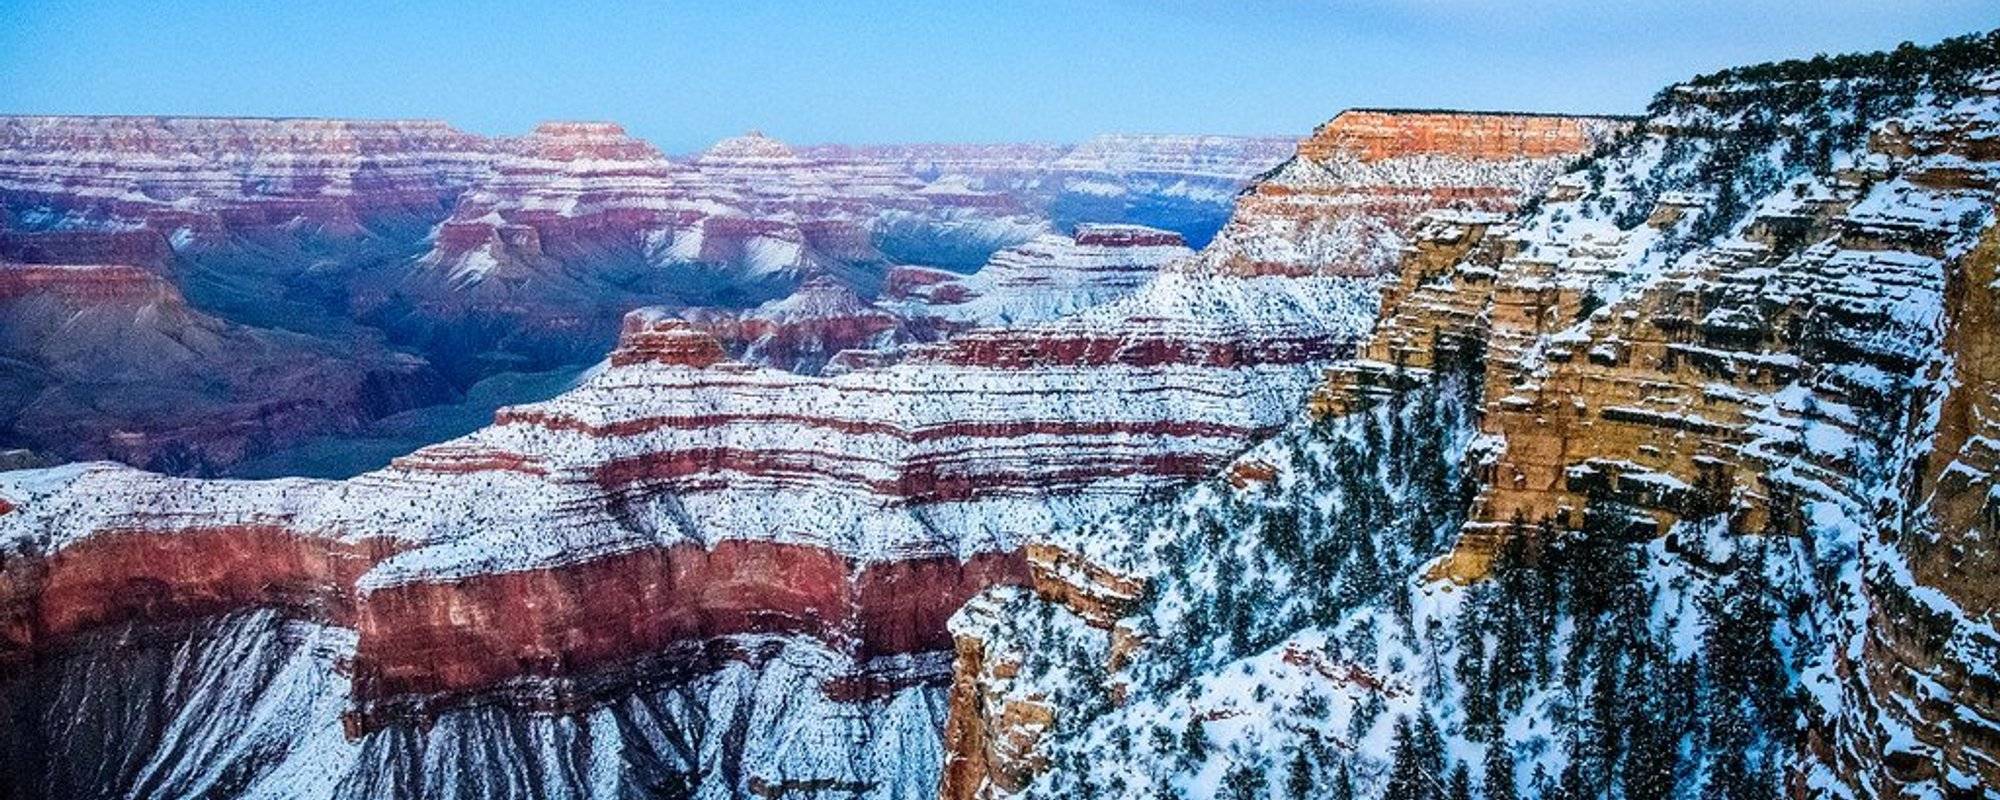 Share My World: Grand Canyon in the snow